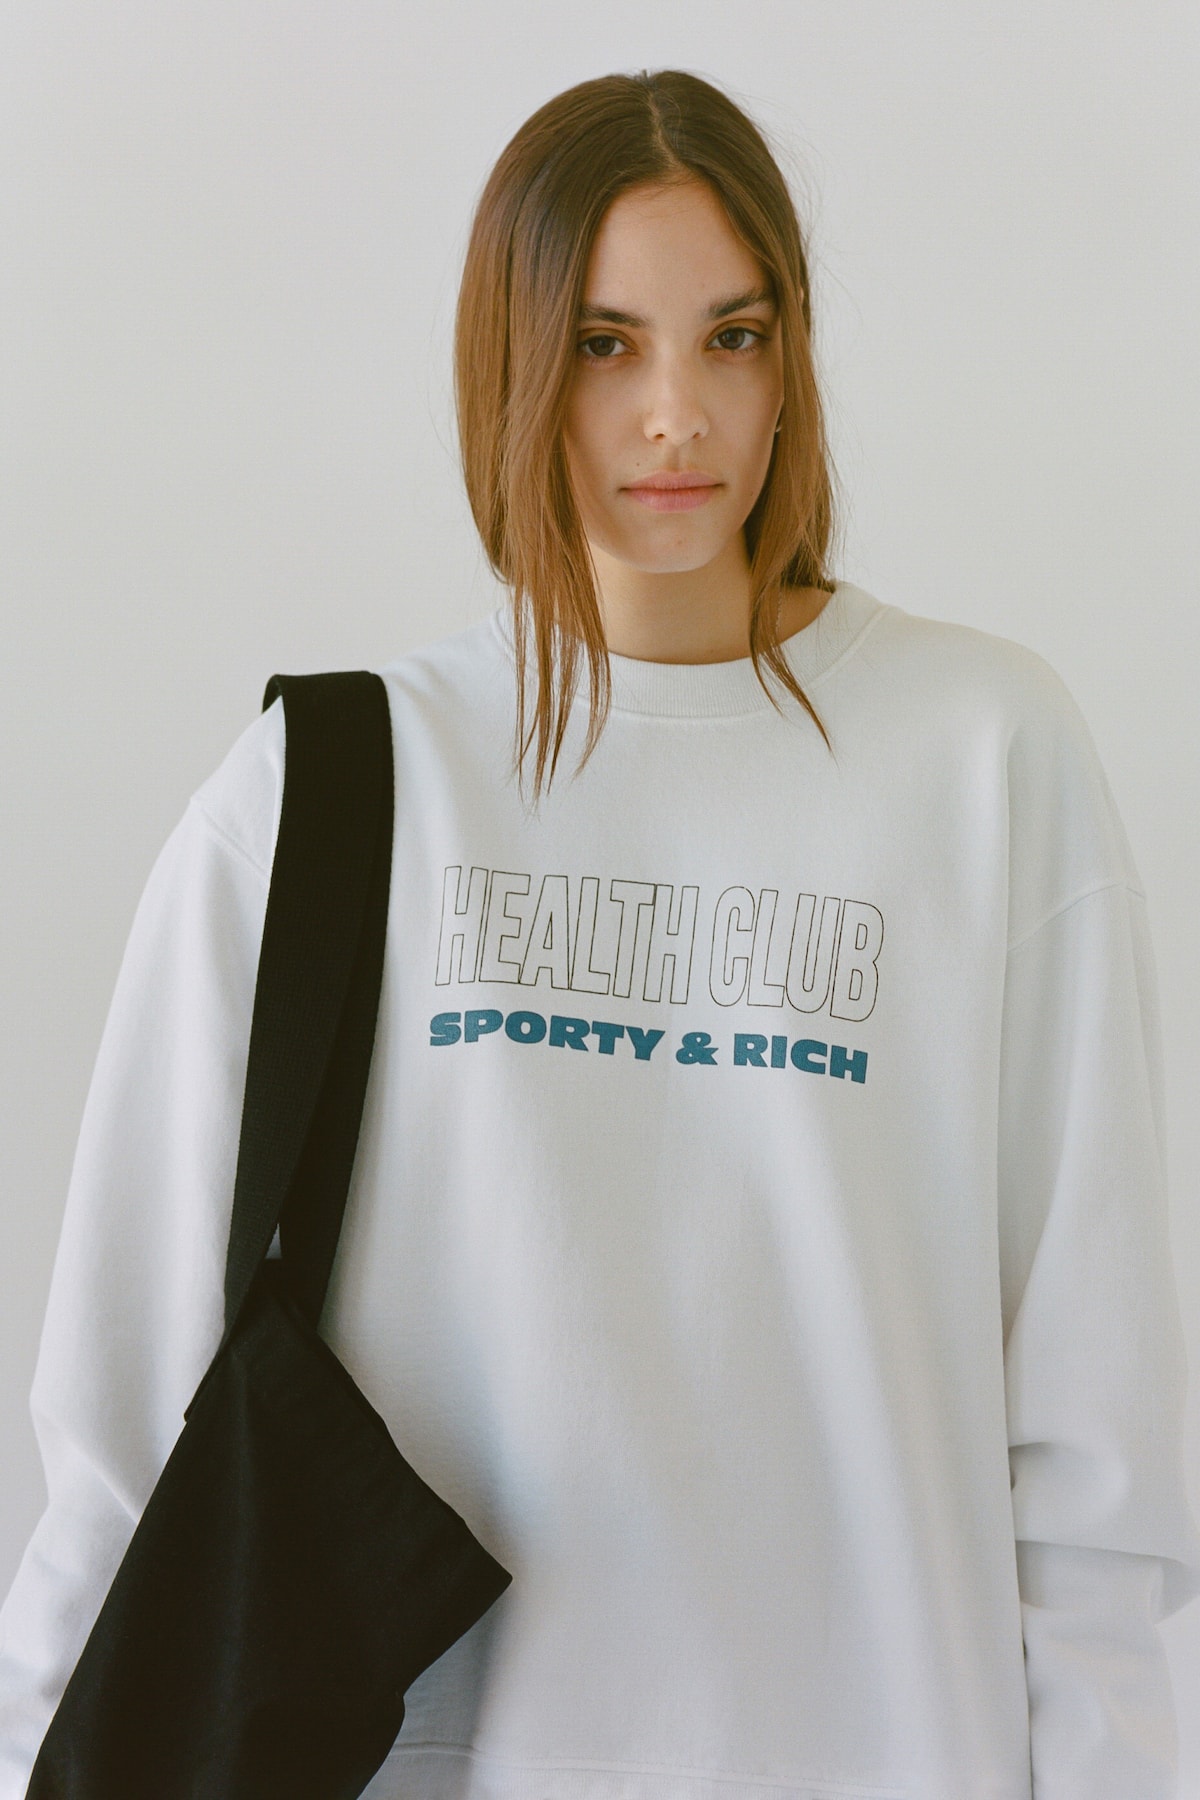 Sporty & Rich Emily Oberg Spring 2020 Collection Campaign Sweatshirt Logo T-Shirt 